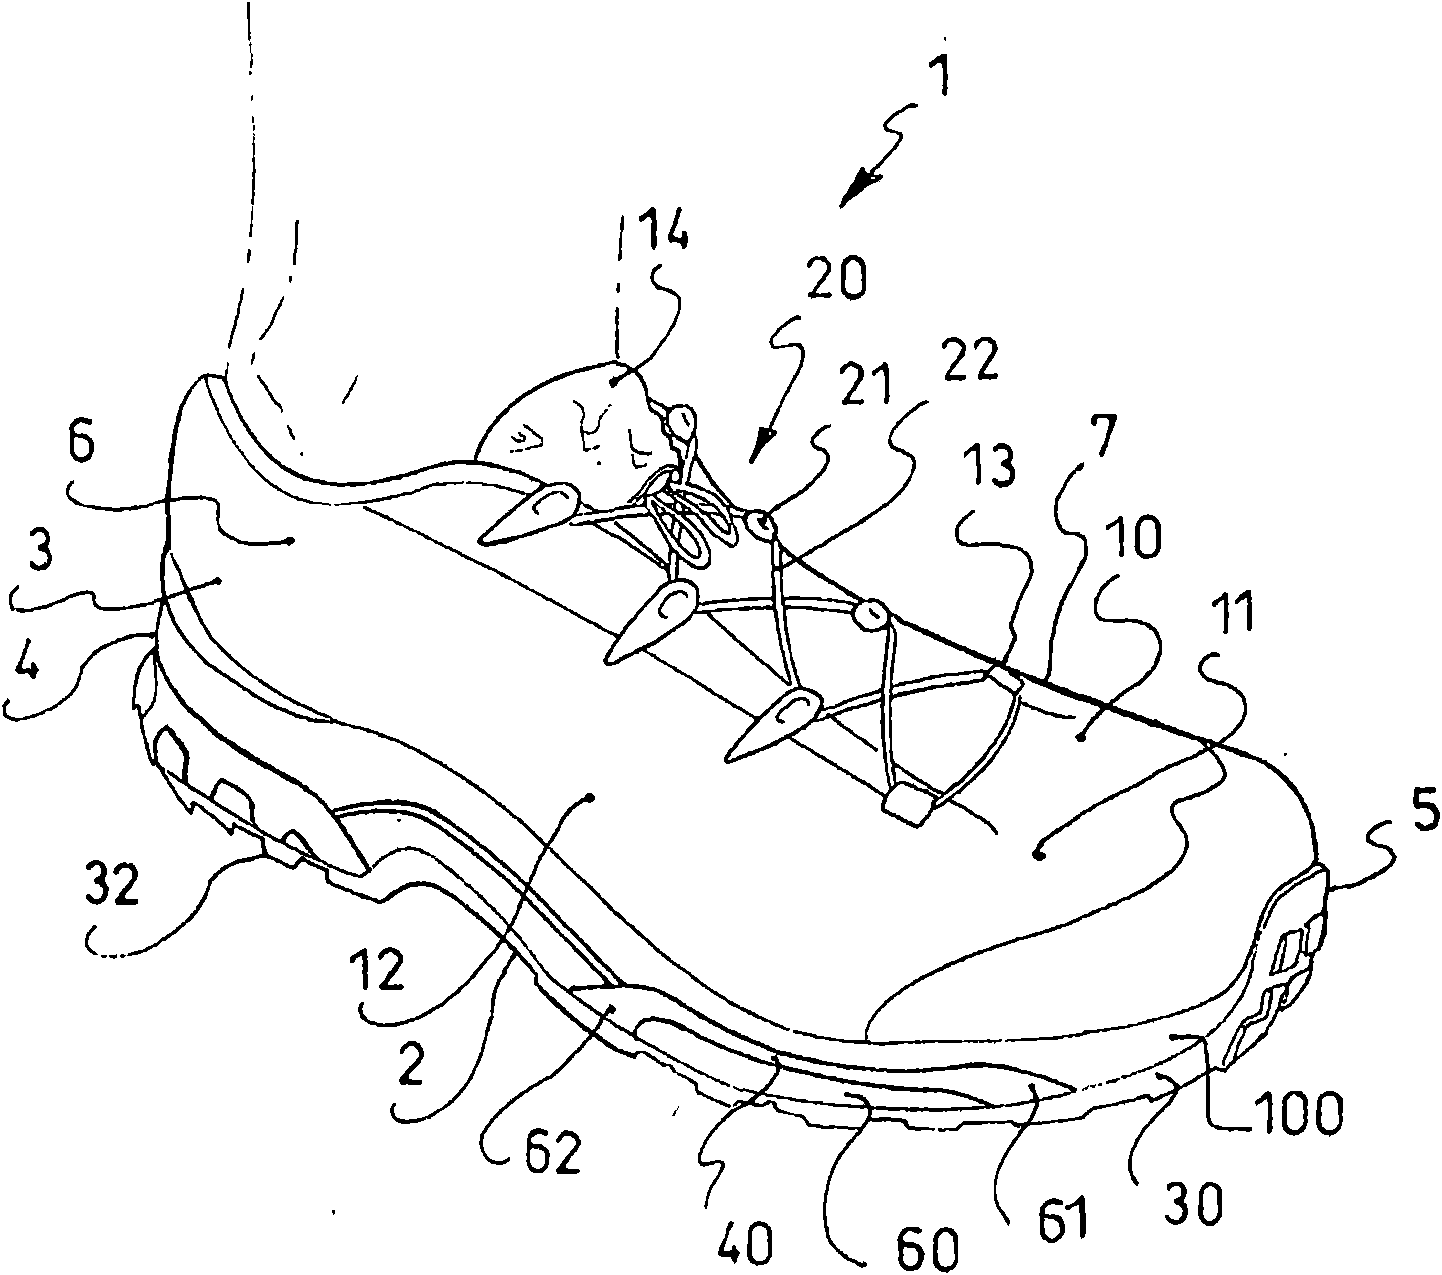 Shoe with improved bottom assembly